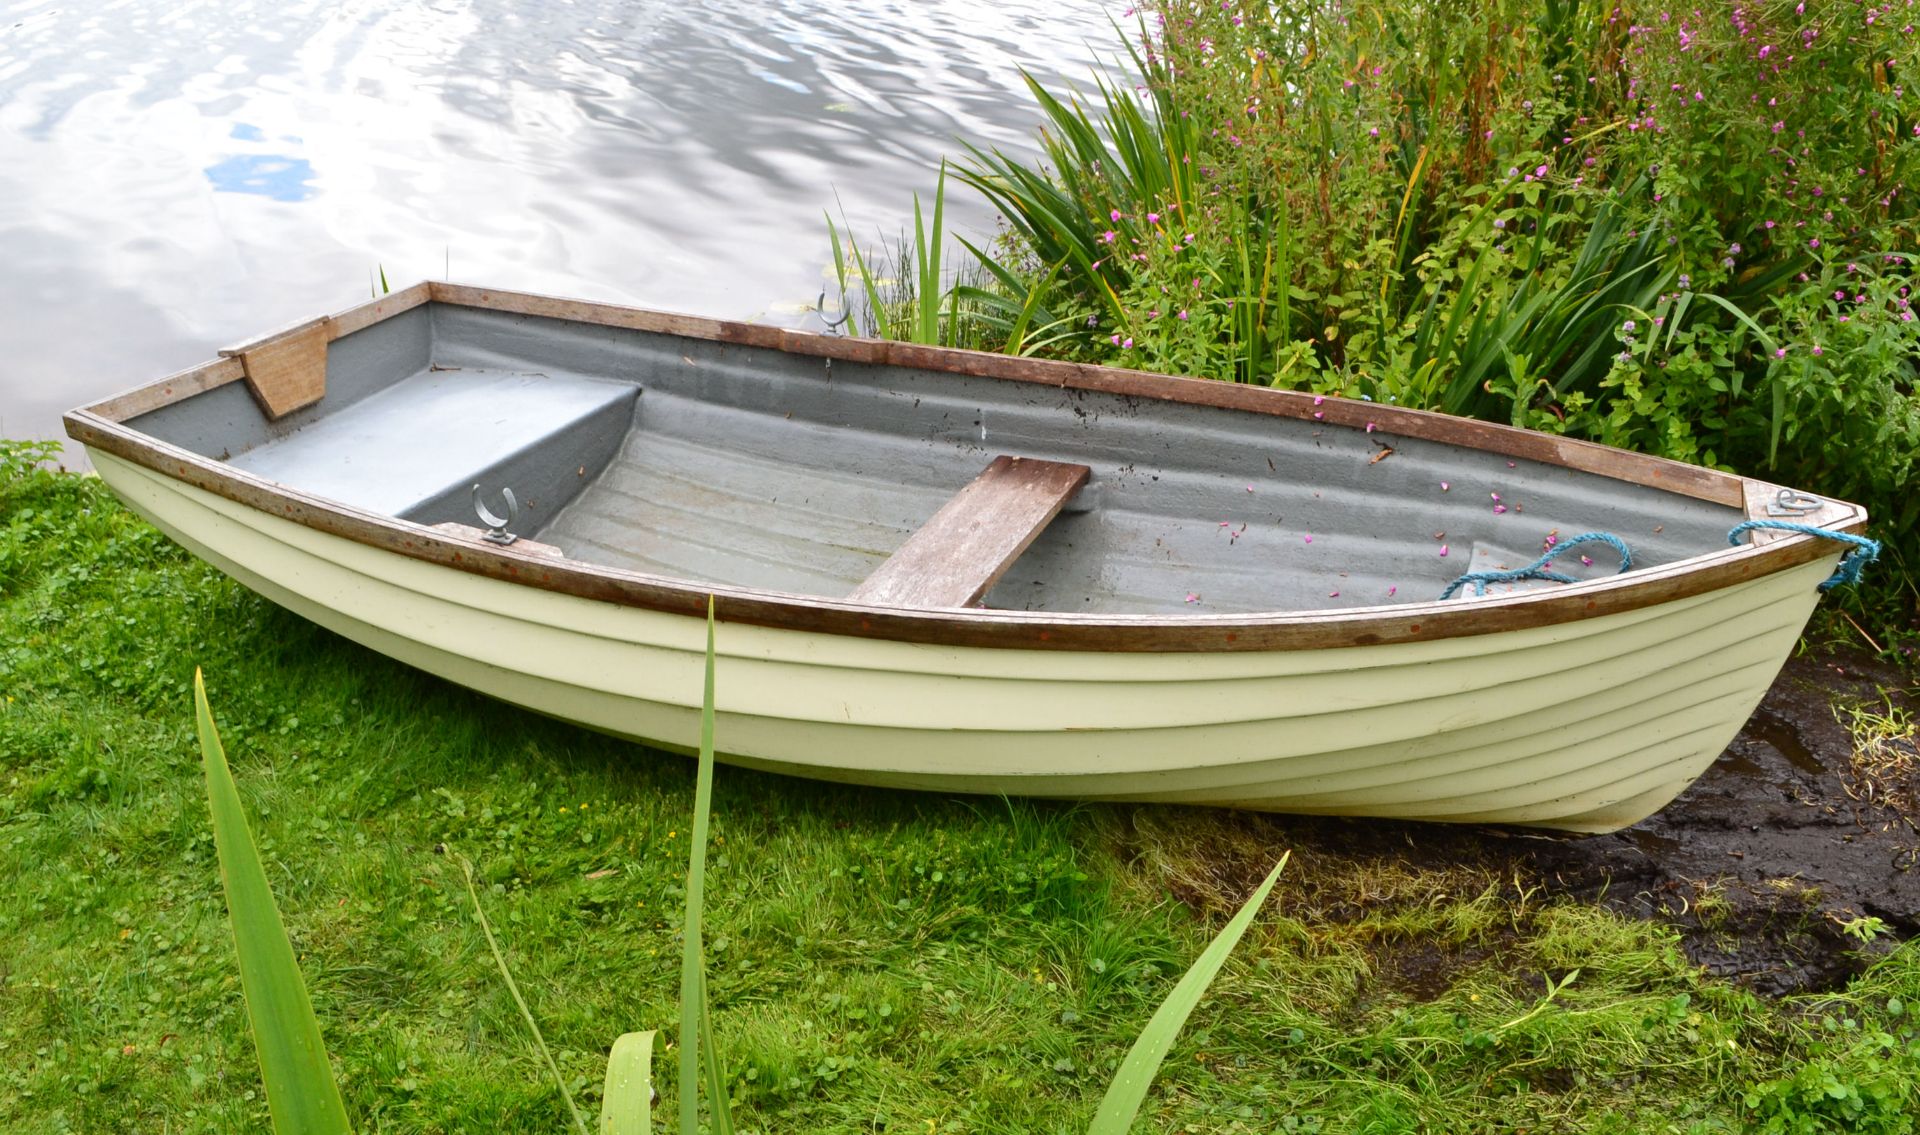 1 x Clovelly 290 Glass Fibre Rowing Boat - 240Kg Maximum Load - CL226 - Location: Knutsford WA16 - Image 3 of 15